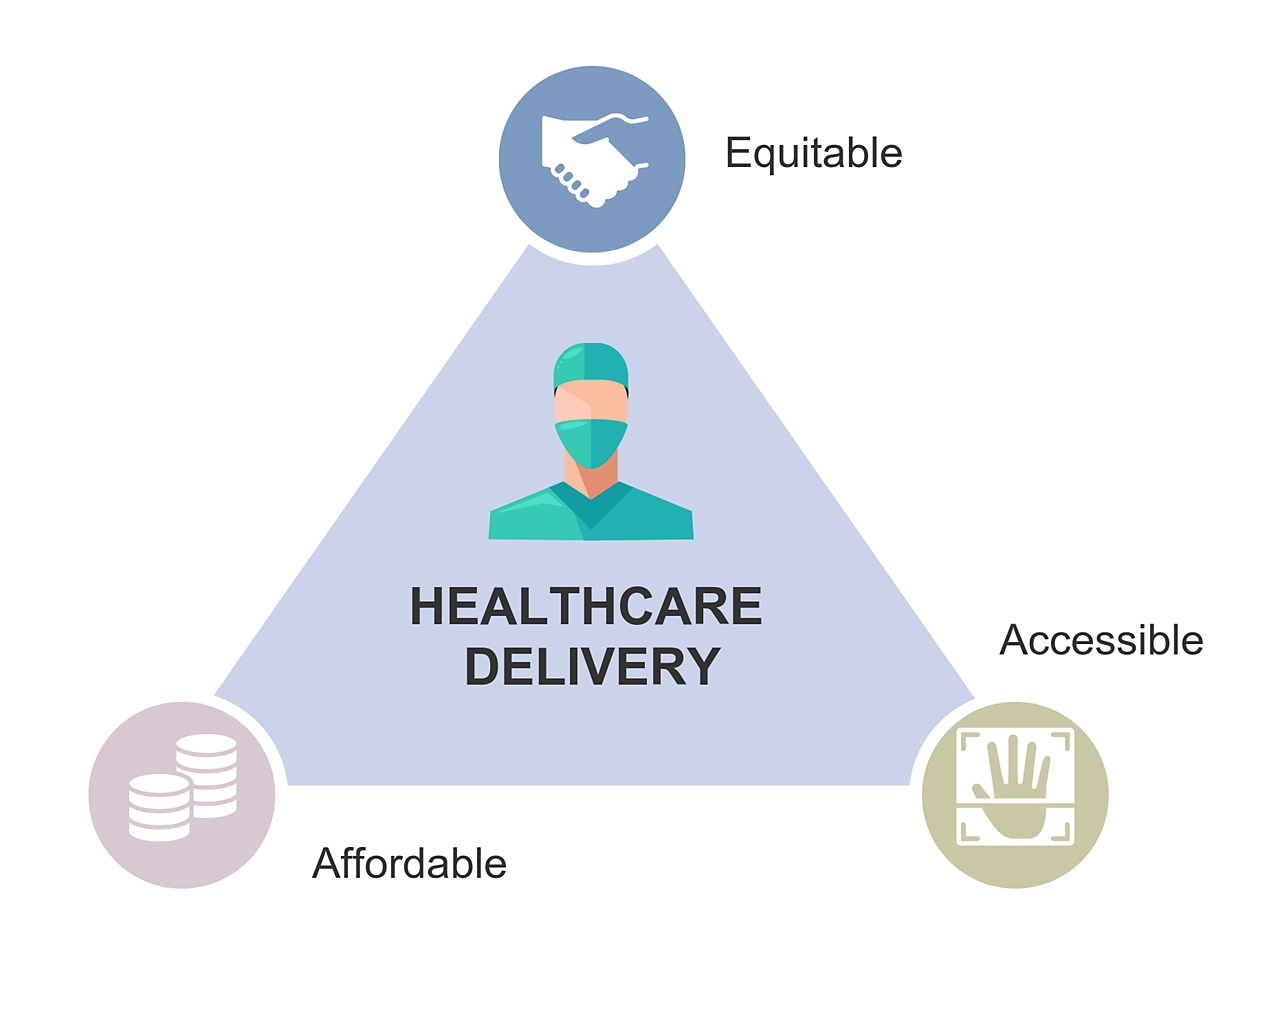 paradigm shifts in healthcare delivery